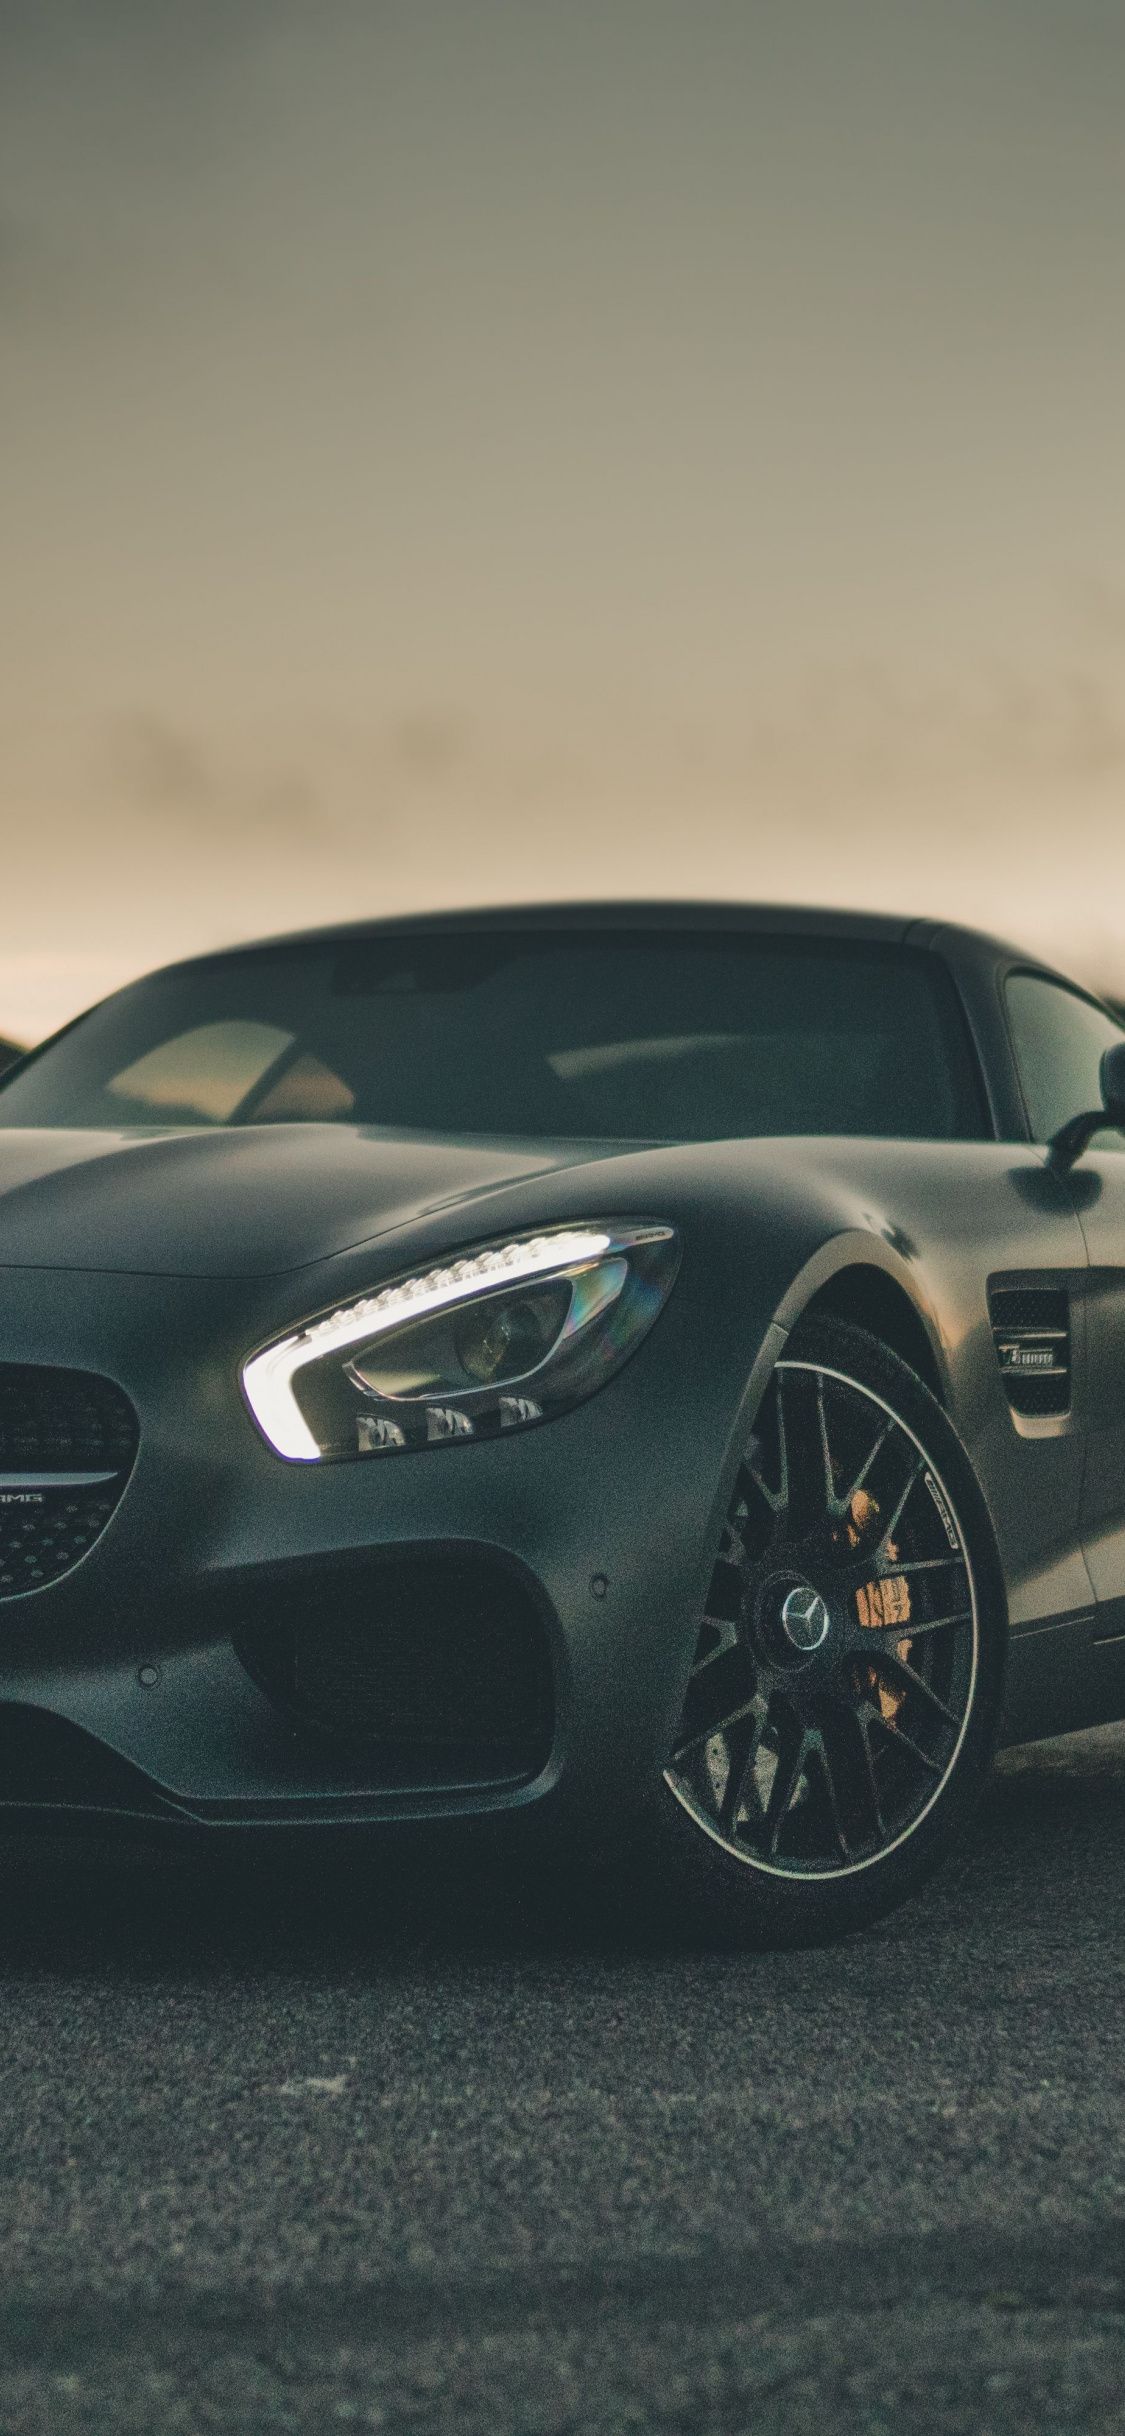 Download Black, Mercedes Amg Gt, Sports Car 1125x2436 Wallpaper, Iphone X, 1125x2436 HD Image, Background, 17466